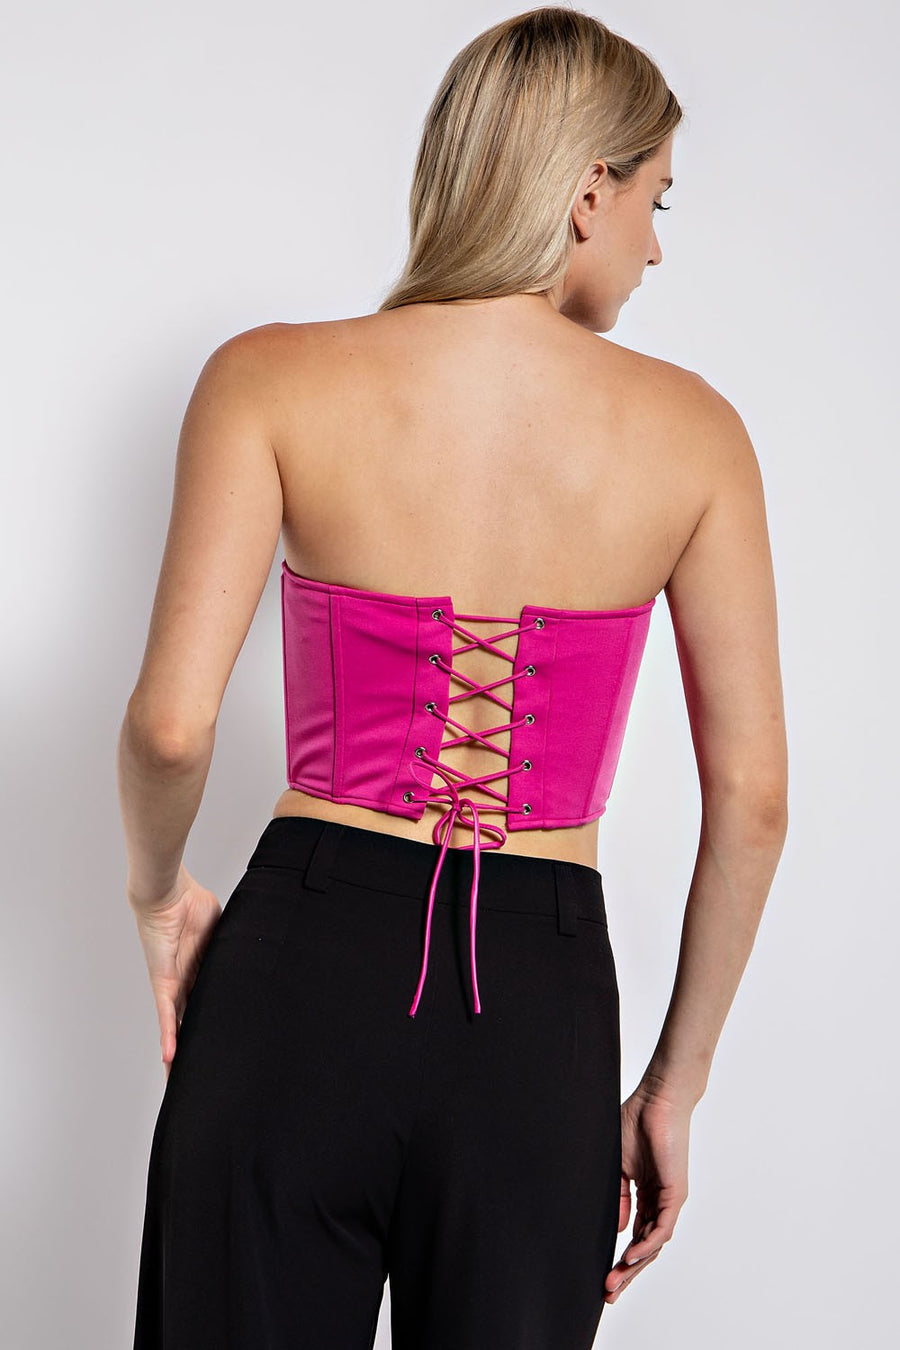 strapless corset top in the color hot pink.